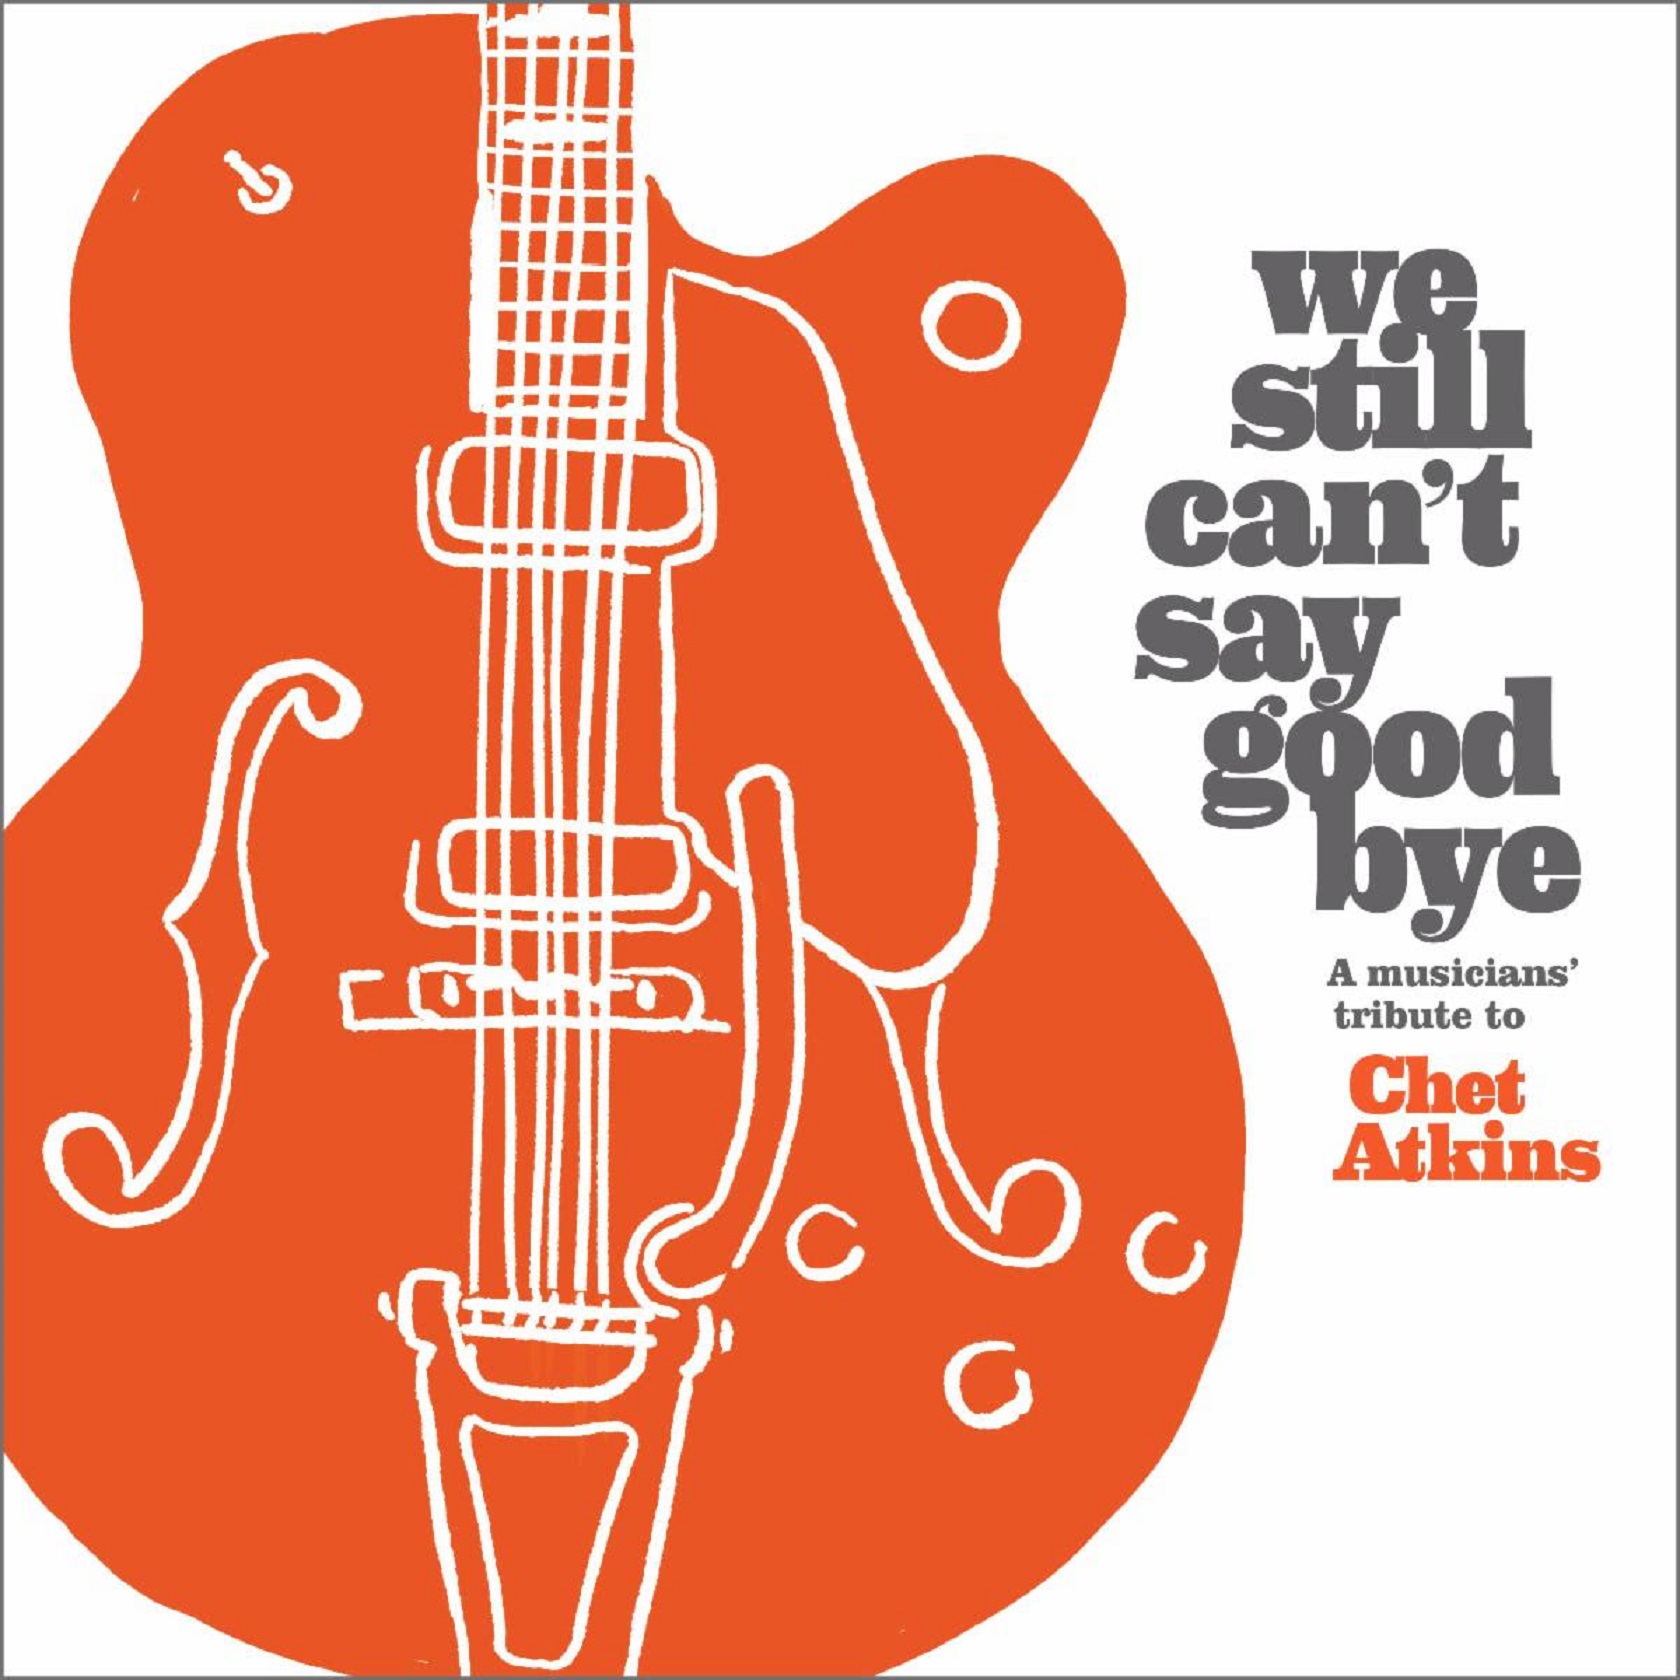 Happy Heavenly 100th Birthday Today To Chet Atkins—His Music and Legacy Are Celebrated on WE STILL CAN’T SAY GOOD BYE—A Musicians’ Tribute To Chet Atkins